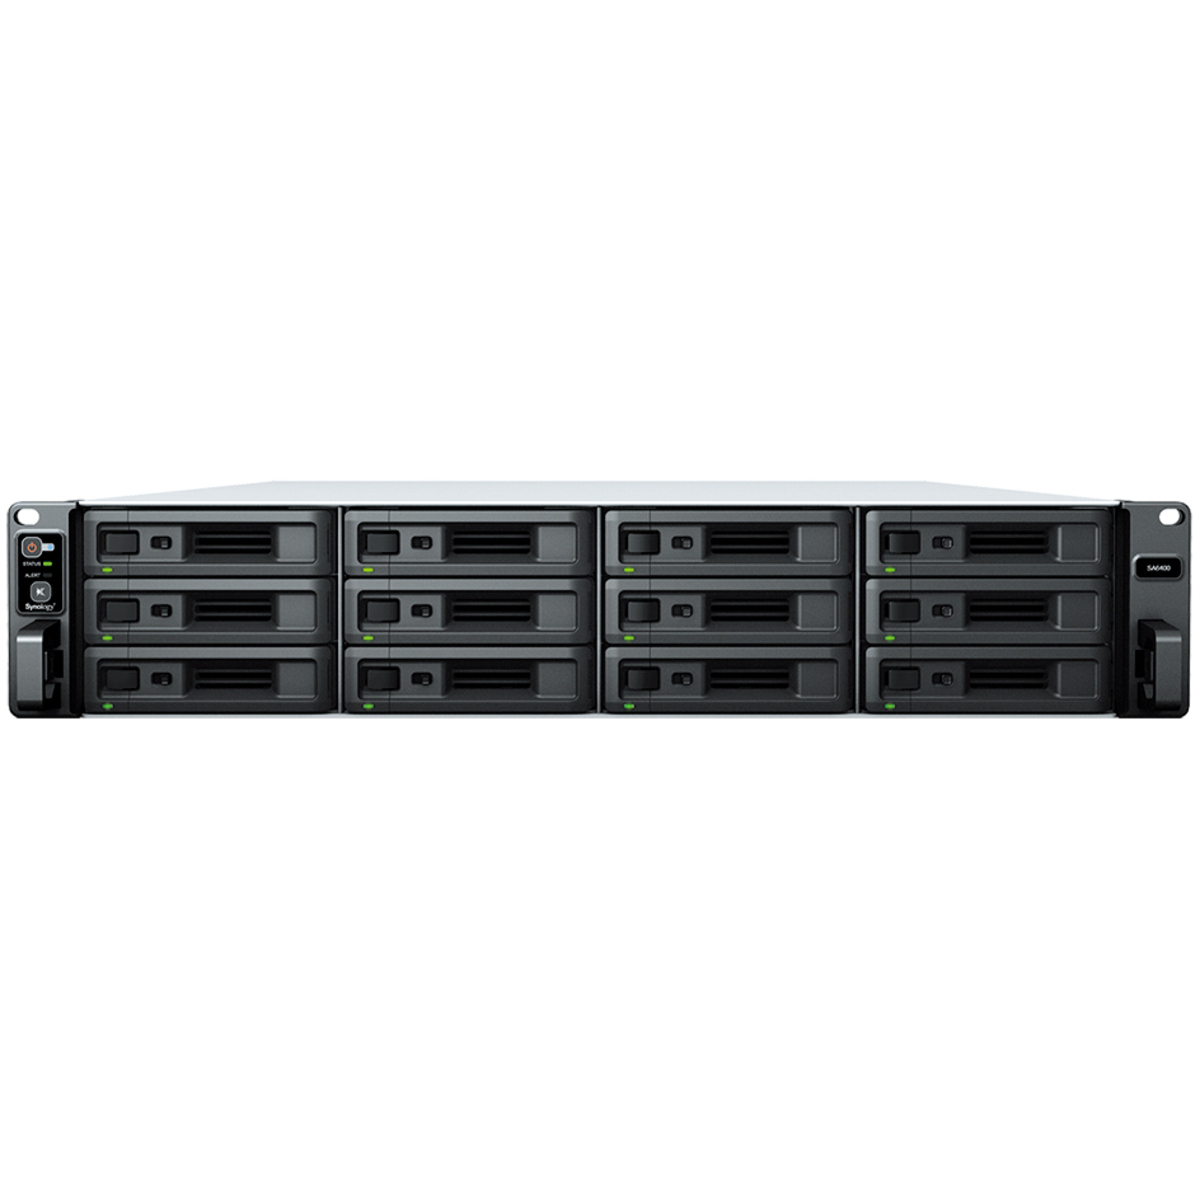 Synology RackStation SA6400 132tb 12-Bay RackMount Large Business / Enterprise NAS - Network Attached Storage Device 11x12tb Seagate IronWolf ST12000VN0008 3.5 7200rpm SATA 6Gb/s HDD NAS Class Drives Installed - Burn-In Tested RackStation SA6400